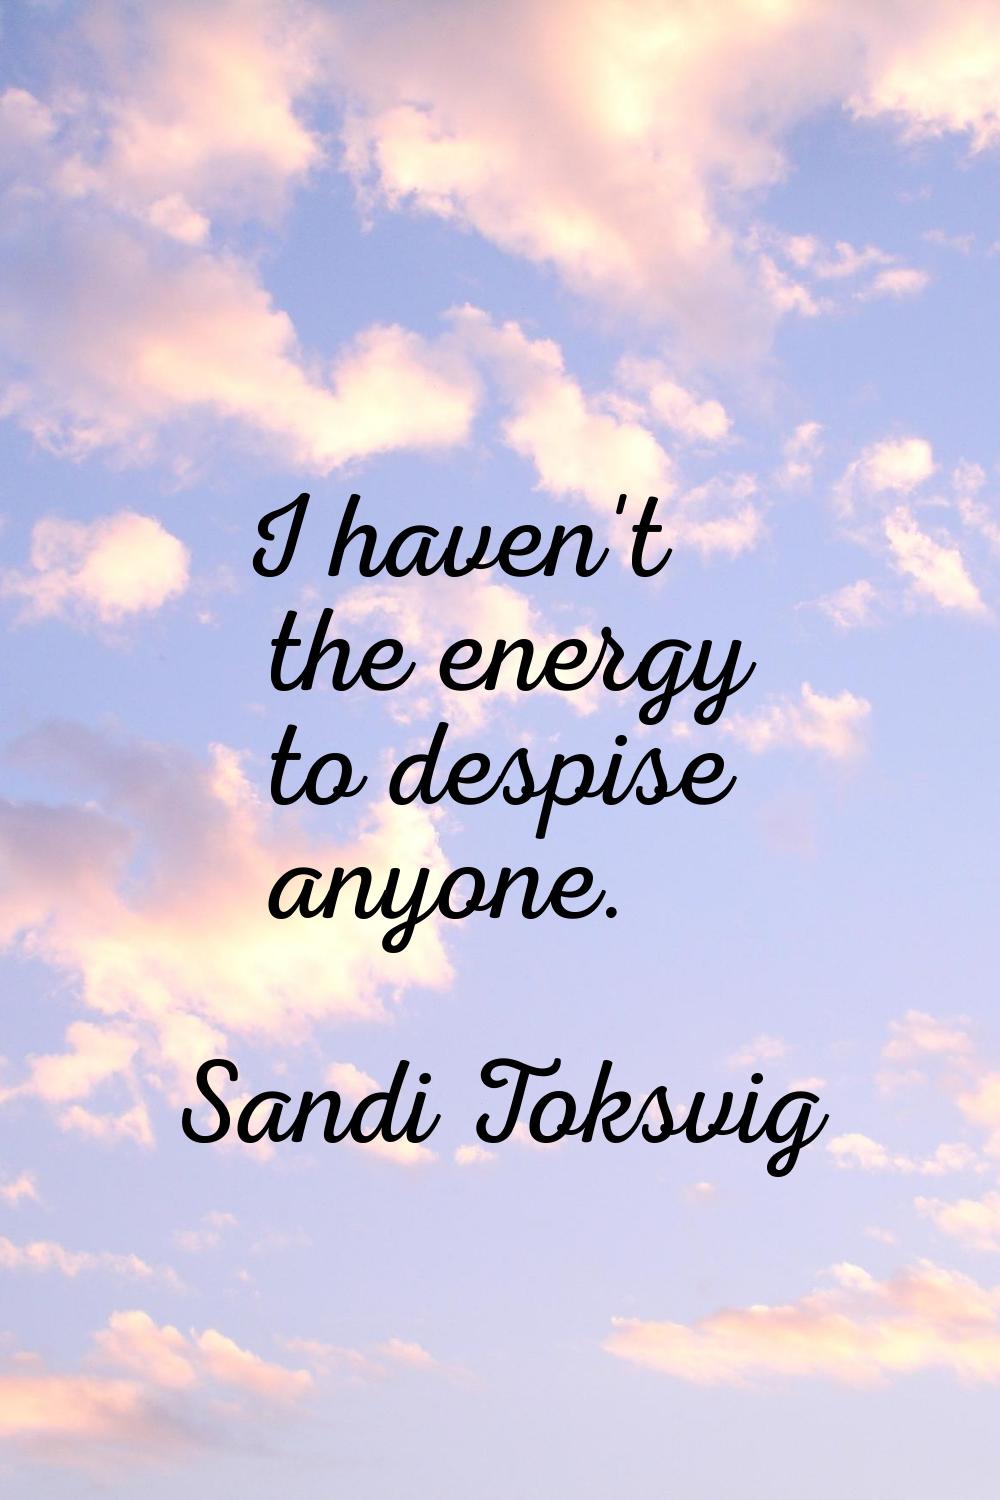 I haven't the energy to despise anyone.